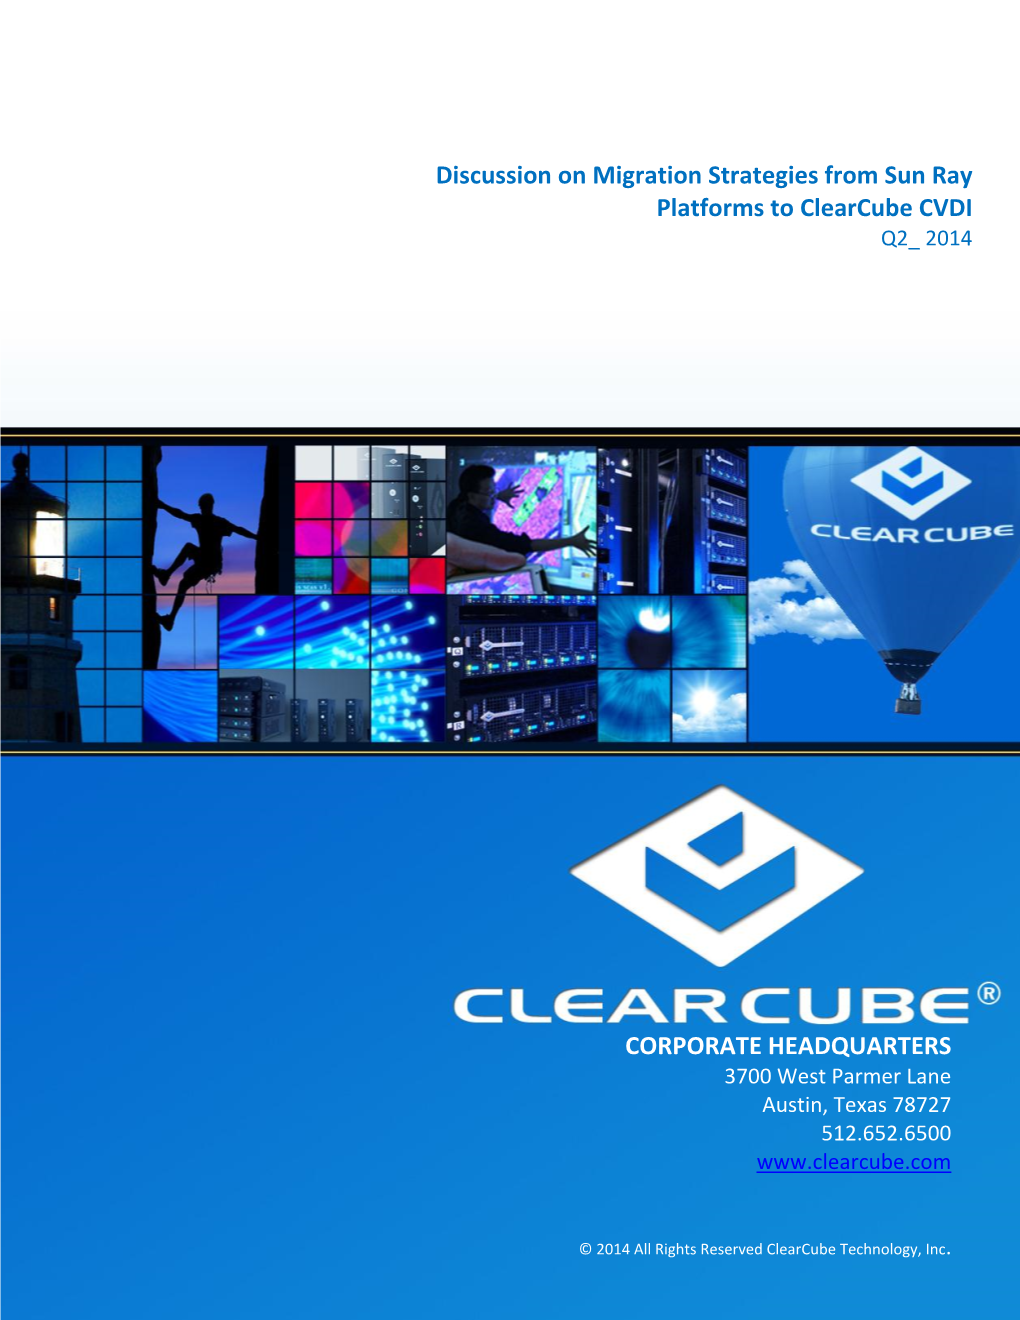 Sun Ray to Clearc Discussion on Migration Strategies from Sun Ray Platforms to Clearcube CVDI CORPORATE HEADQUARTERS